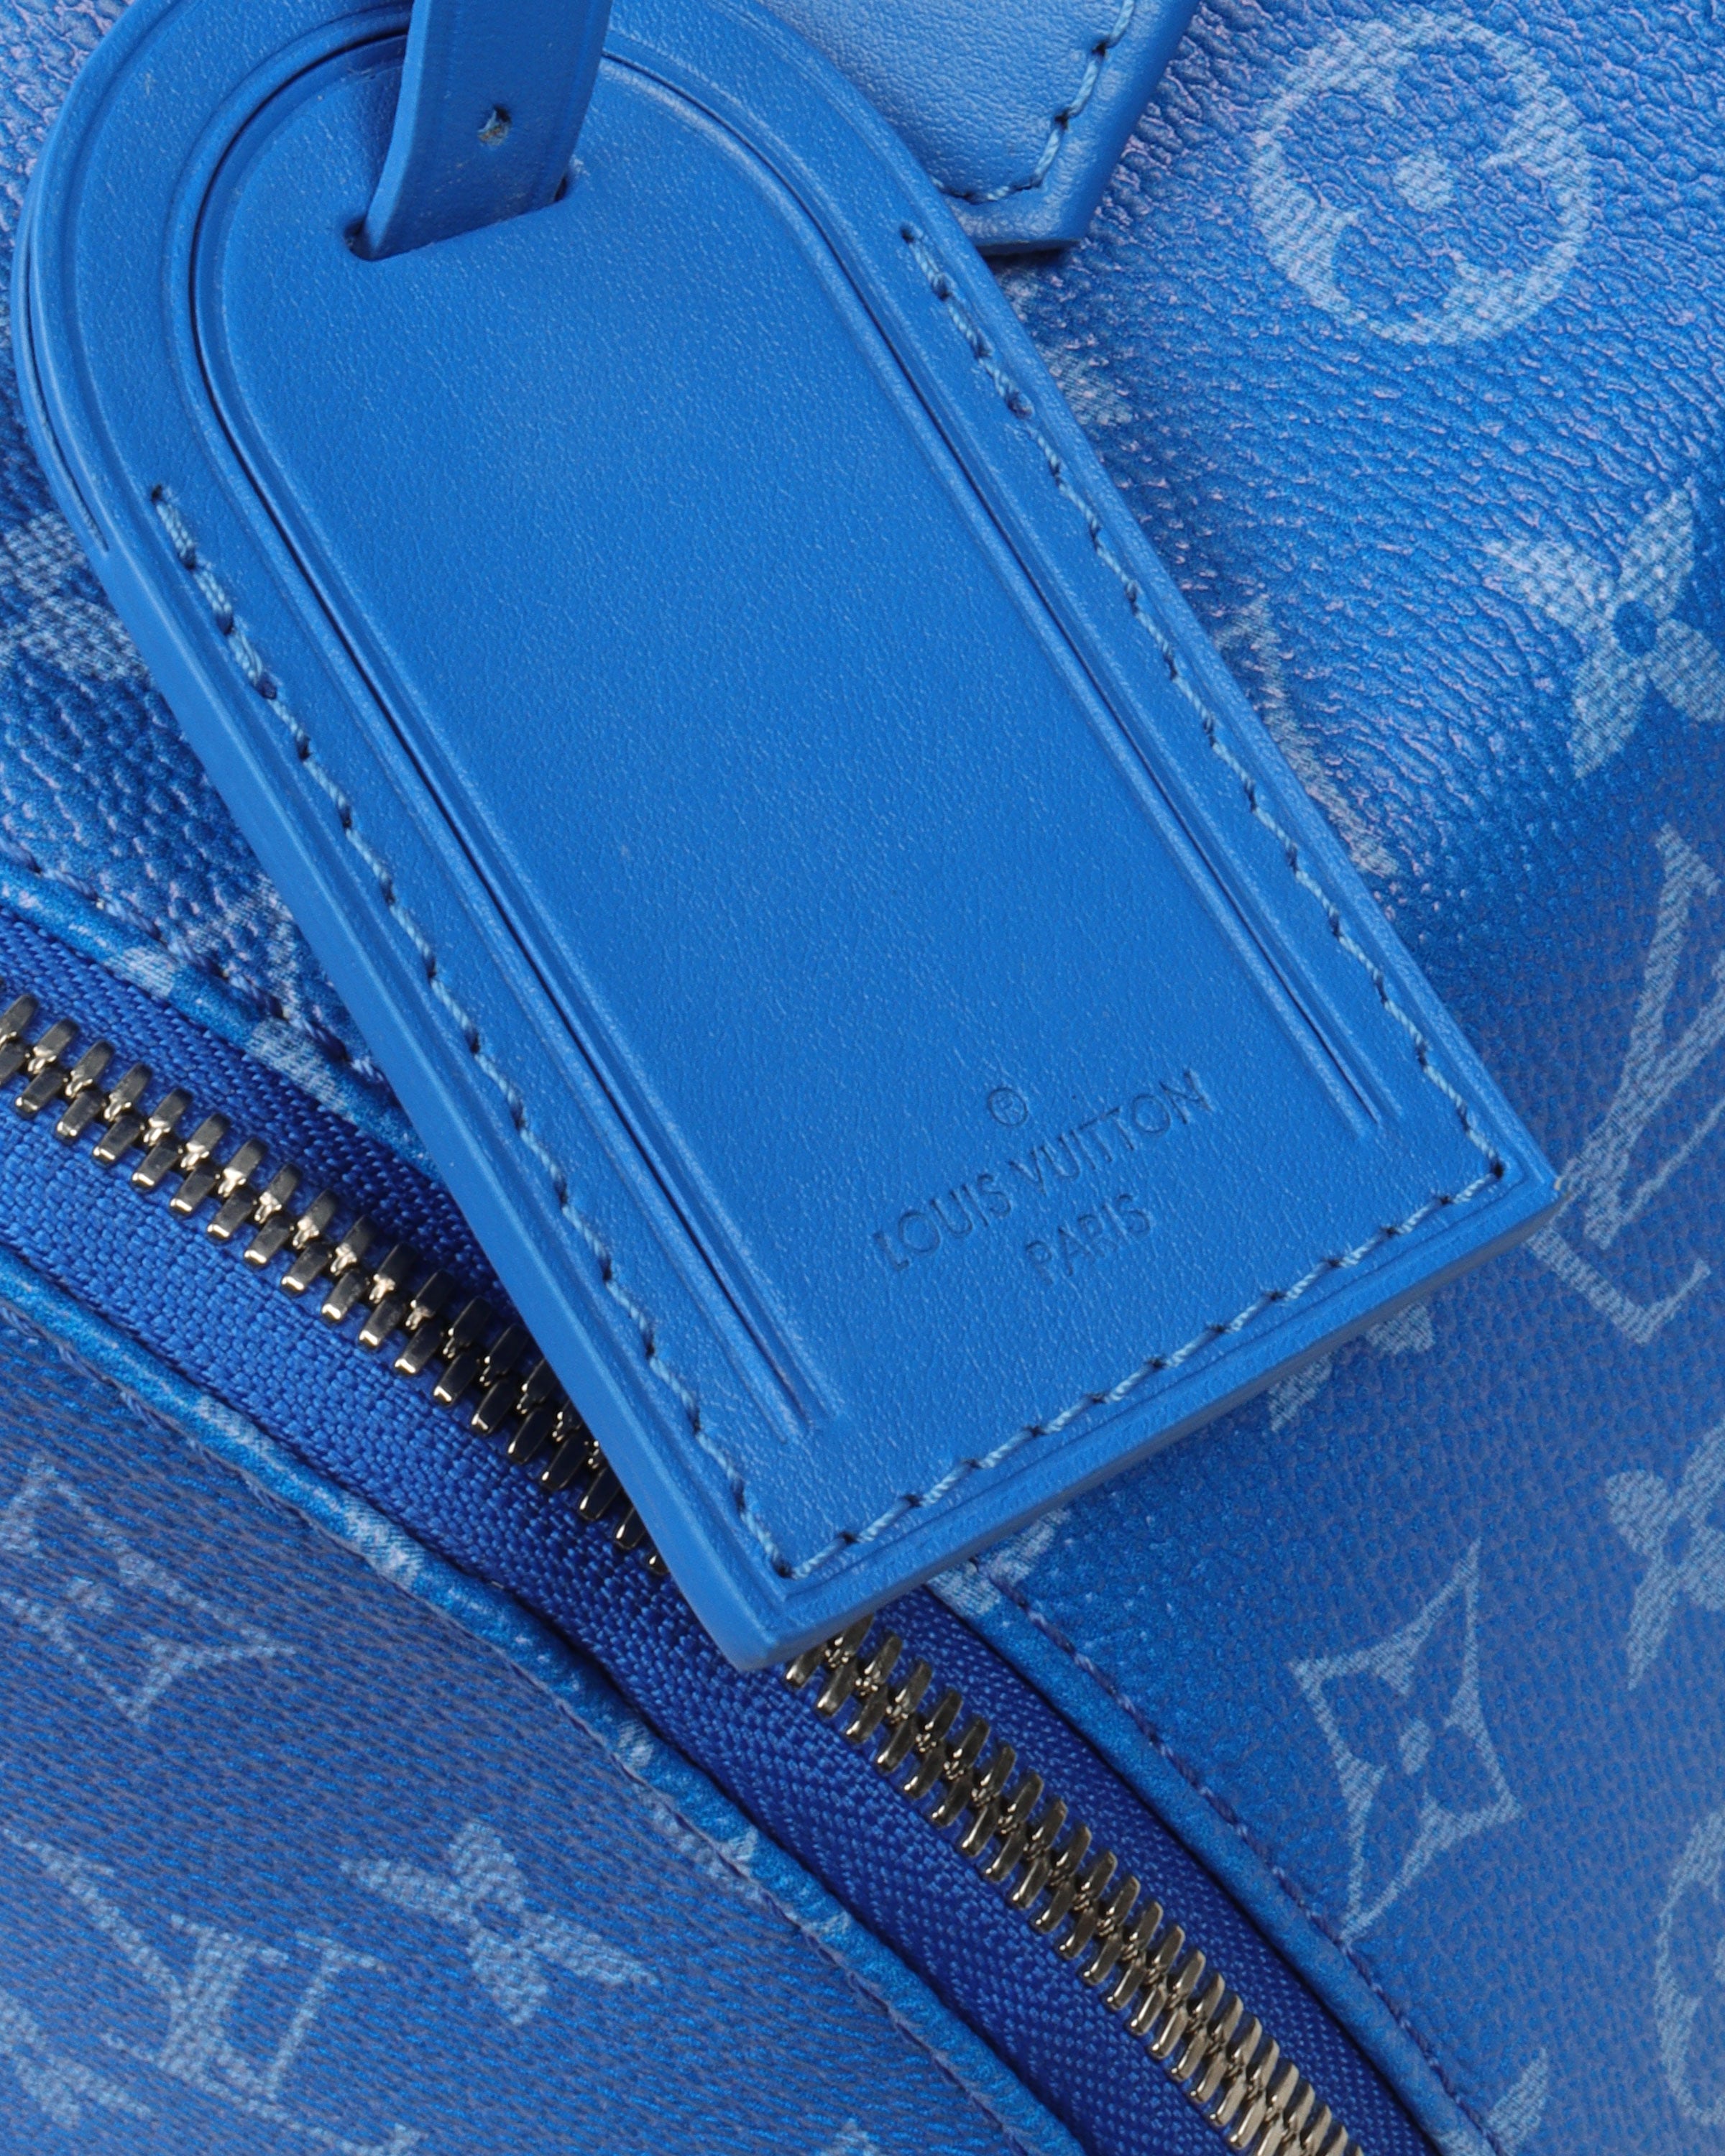 BRAND NEW-Limited Edition Louis Vuitton Keepall 50 Clouds